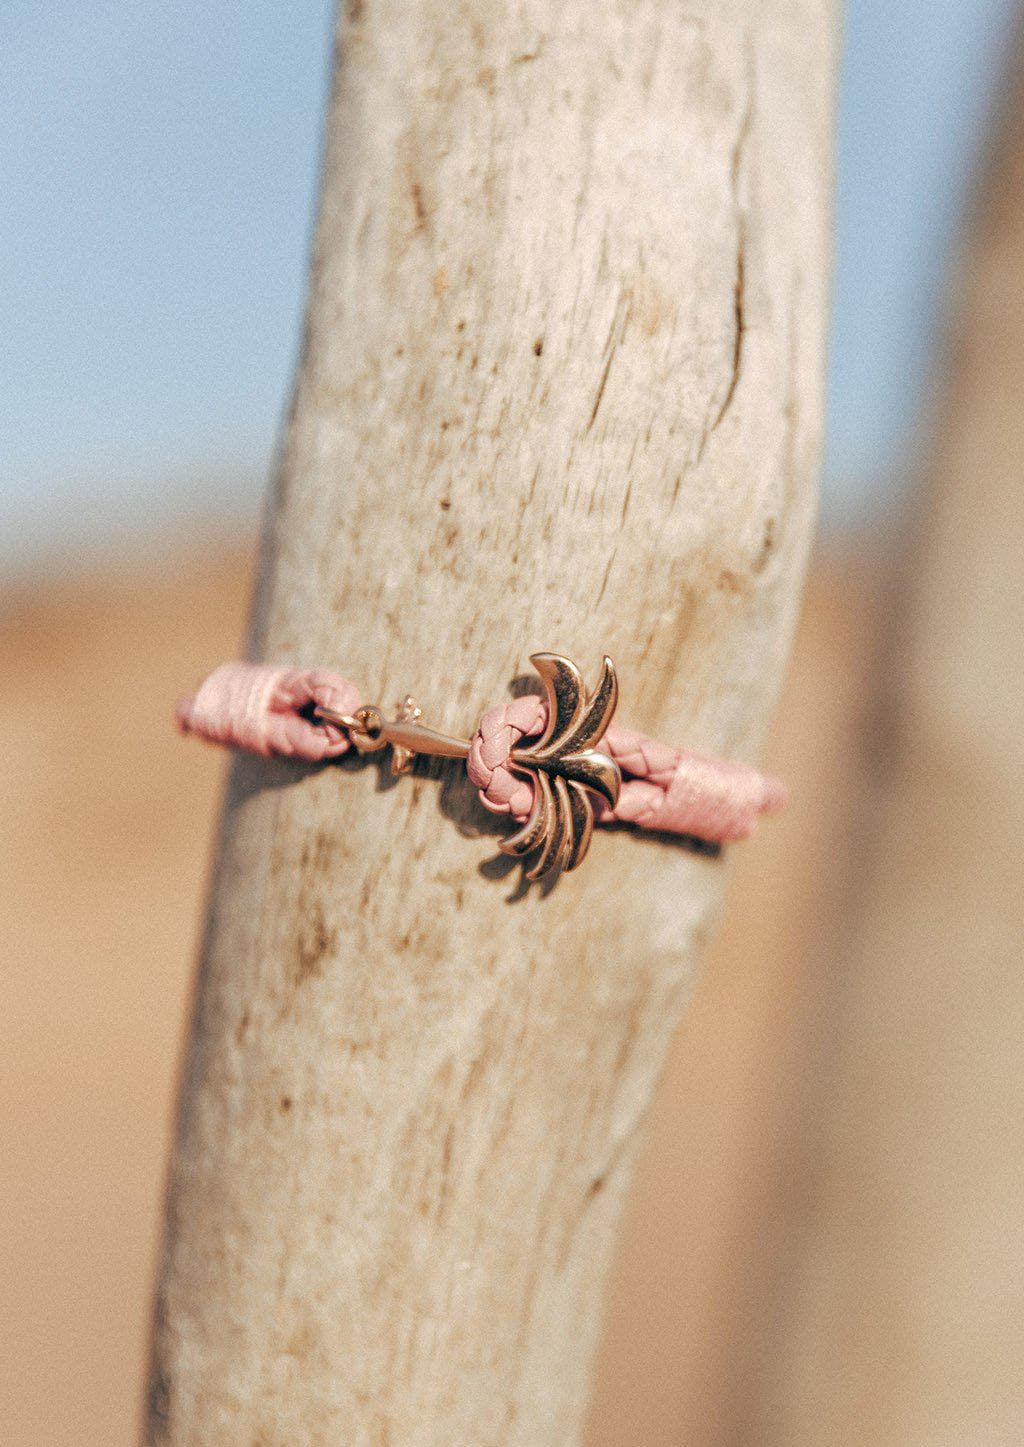 Rosette - Season two Palm anchor bracelet with pink leather. On the beach.